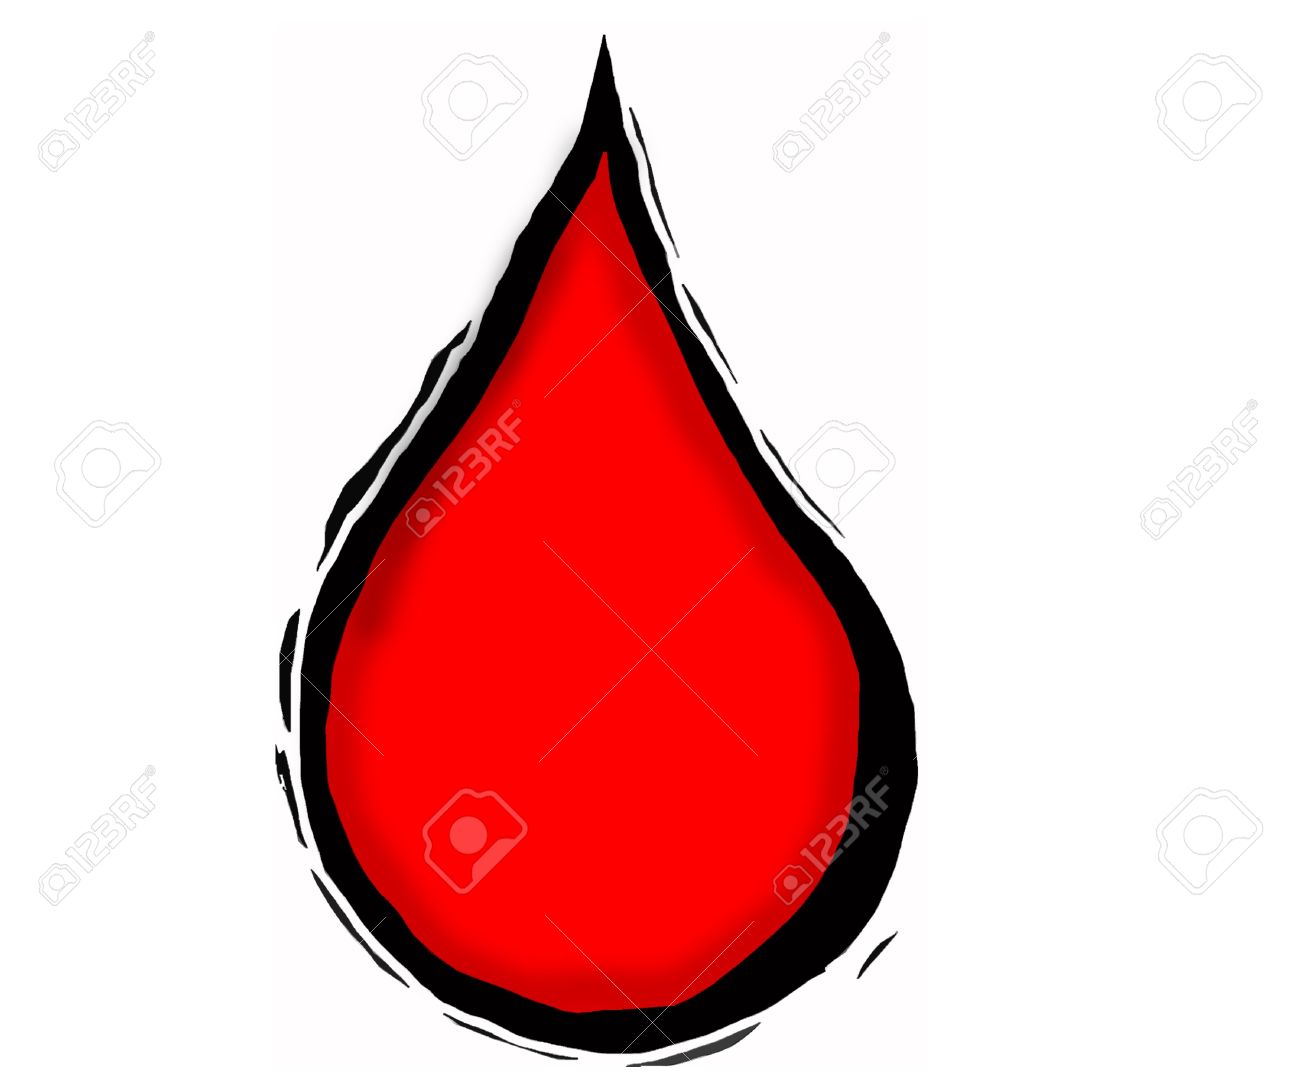 Blood Drop Clipart Rote Farbe Mit 3D.